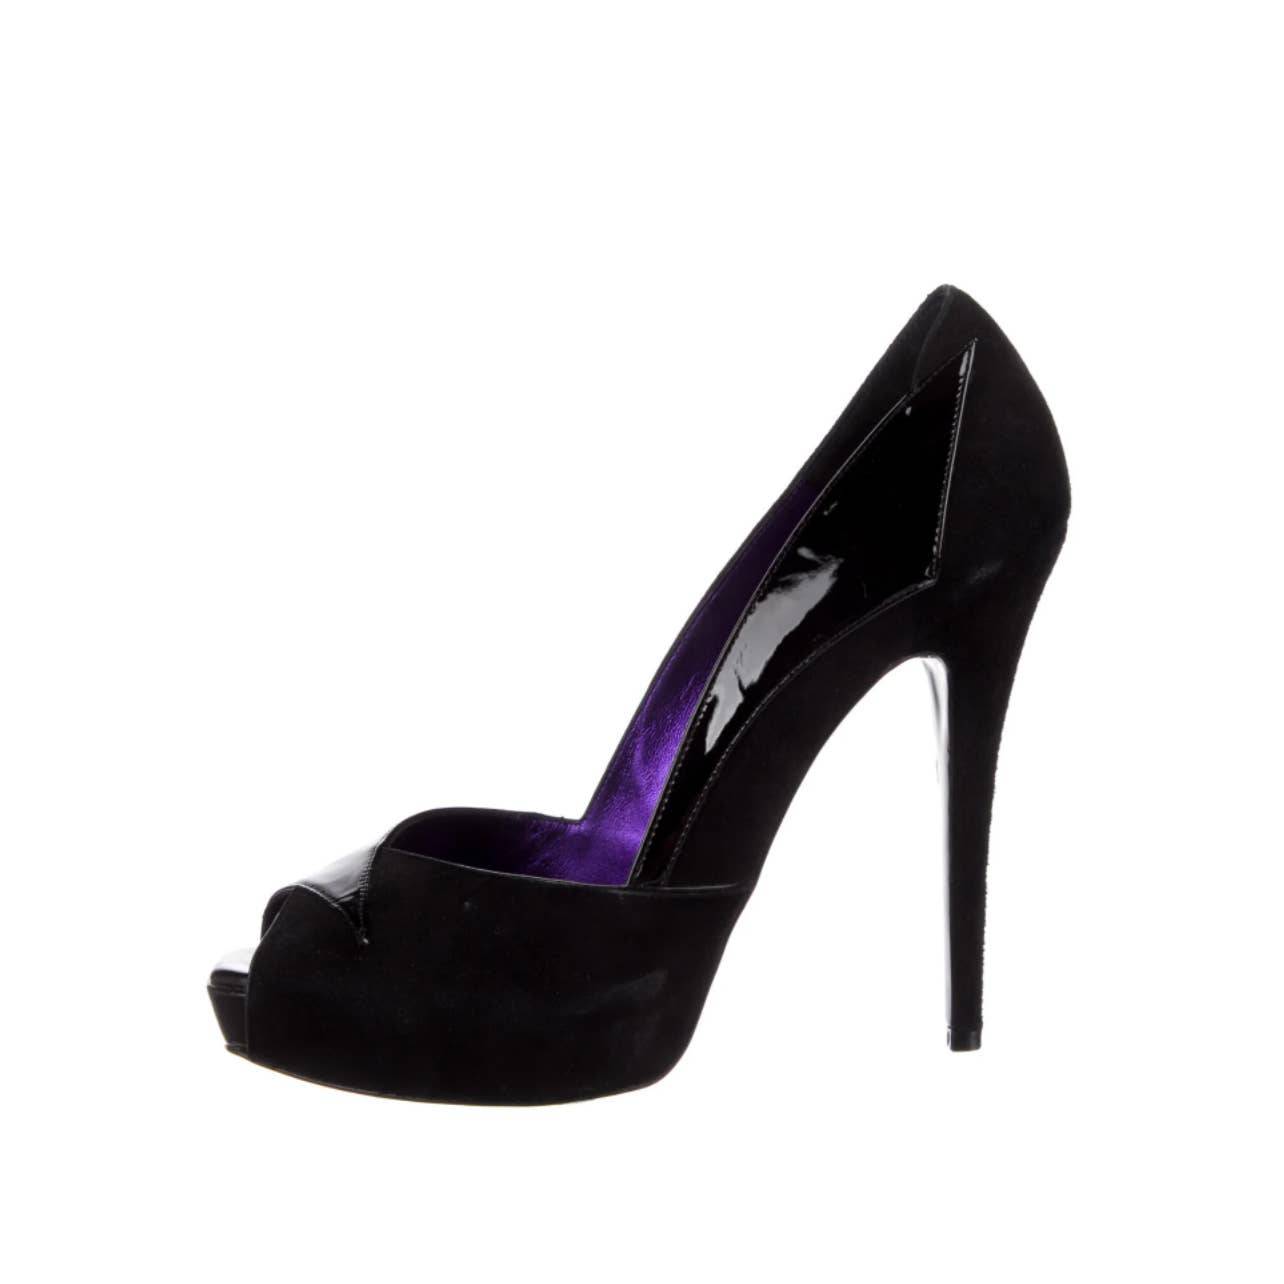 BARBARA BUI Black Patent Leather and Suede Open Toe Platform Pumps